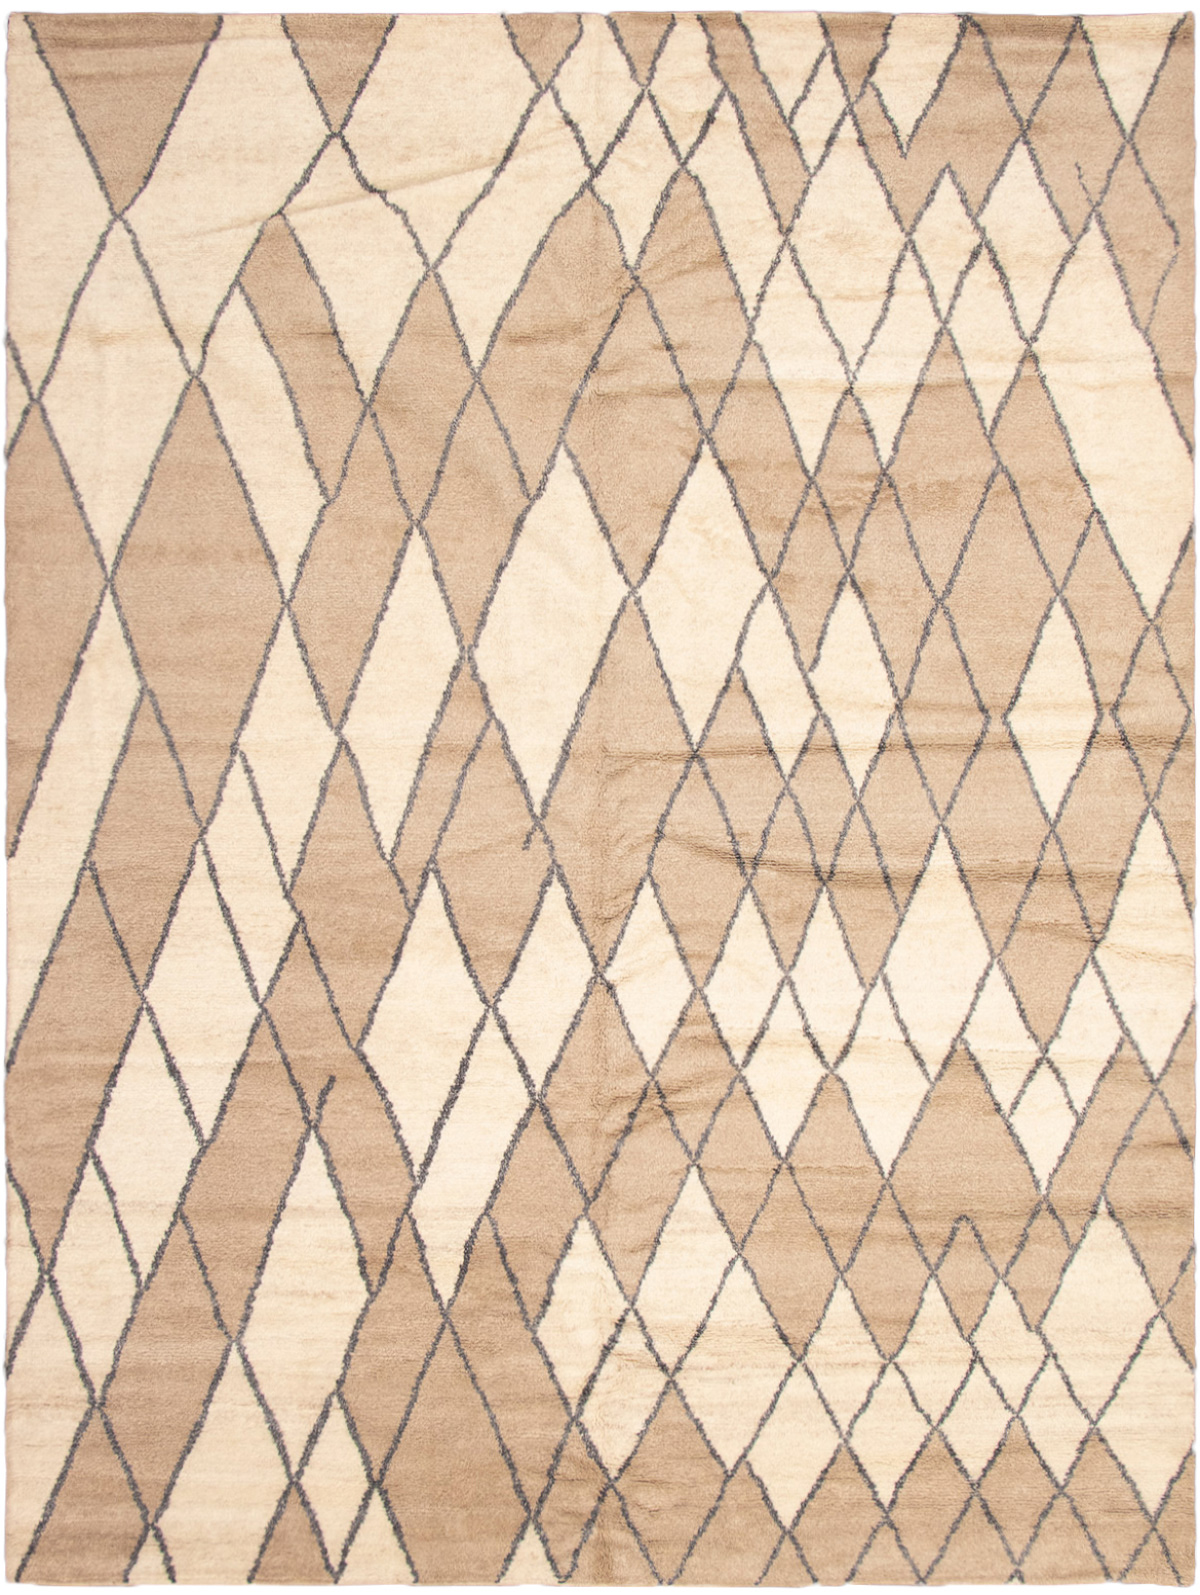 Hand-knotted Arlequin Brown, Cream Wool Rug 10'4" x 14'0" Size: 10'4" x 14'0"  